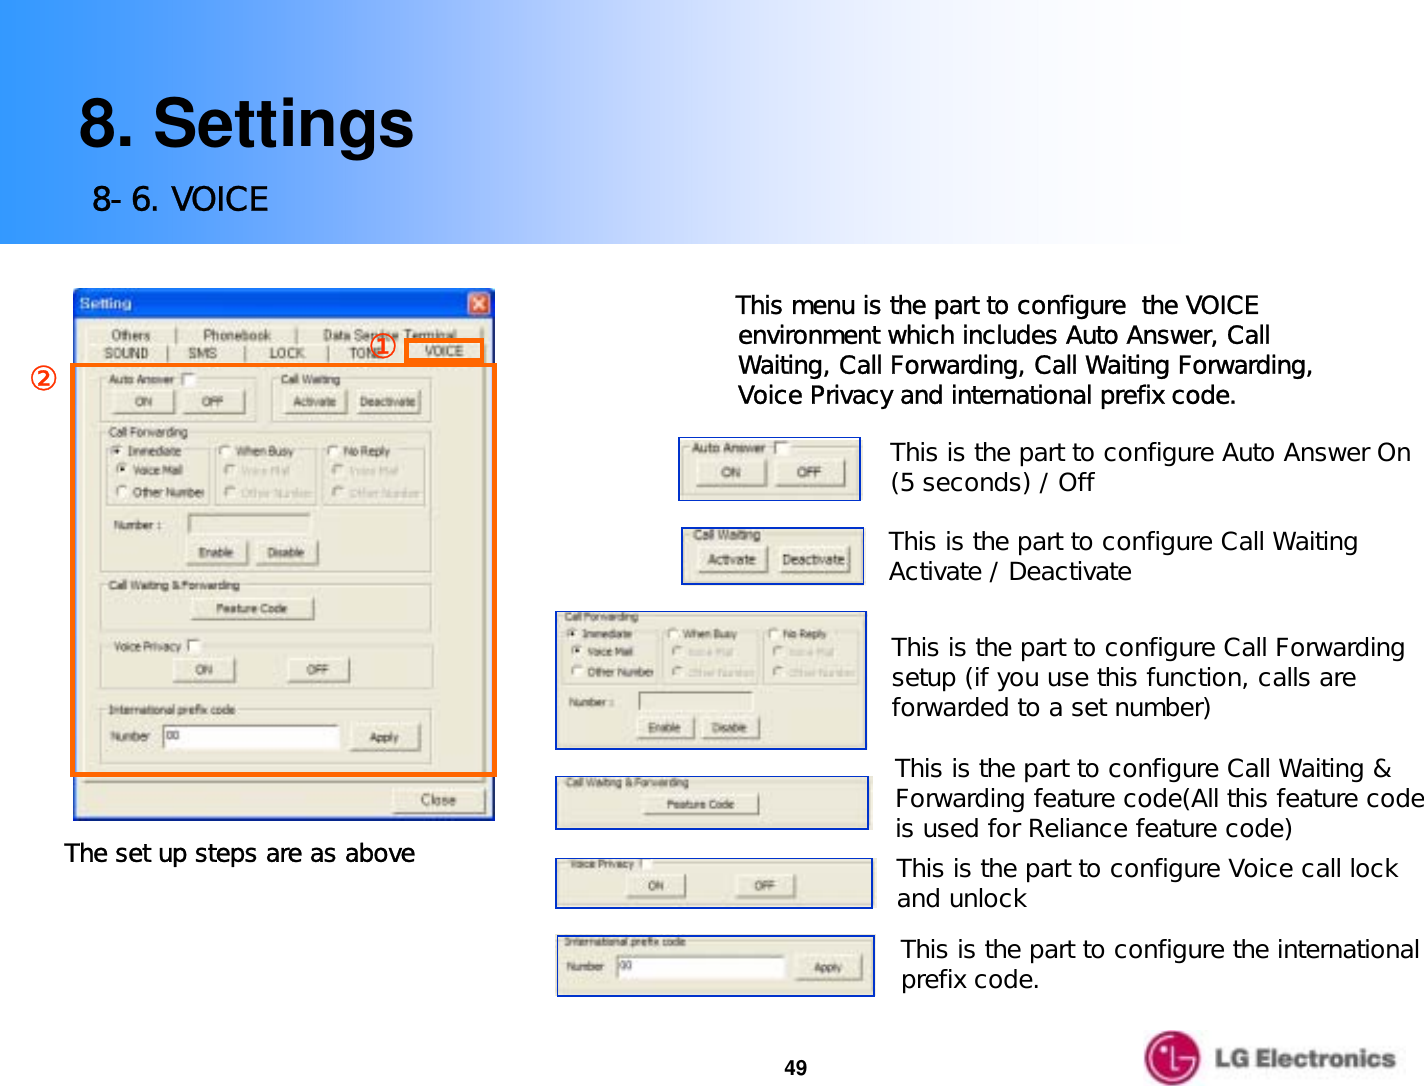 498. Settings8-6. VOICE①②The set up steps are as aboveThis is the part to configure Auto Answer On (5 seconds) / OffThis is the part to configure Call Waiting Activate / DeactivateThis is the part to configure Voice call lockand unlockThis is the part to configure Call Forwarding setup (if you use this function, calls are forwarded to a set number)This menu is the part to configure  the VOICE  environment which includes Auto Answer, Call Waiting, Call Forwarding, Call Waiting Forwarding, Voice Privacy and international prefix code.This is the part to configure Call Waiting &amp; Forwarding feature code(All this feature code is used for Reliance feature code)This is the part to configure the international prefix code.